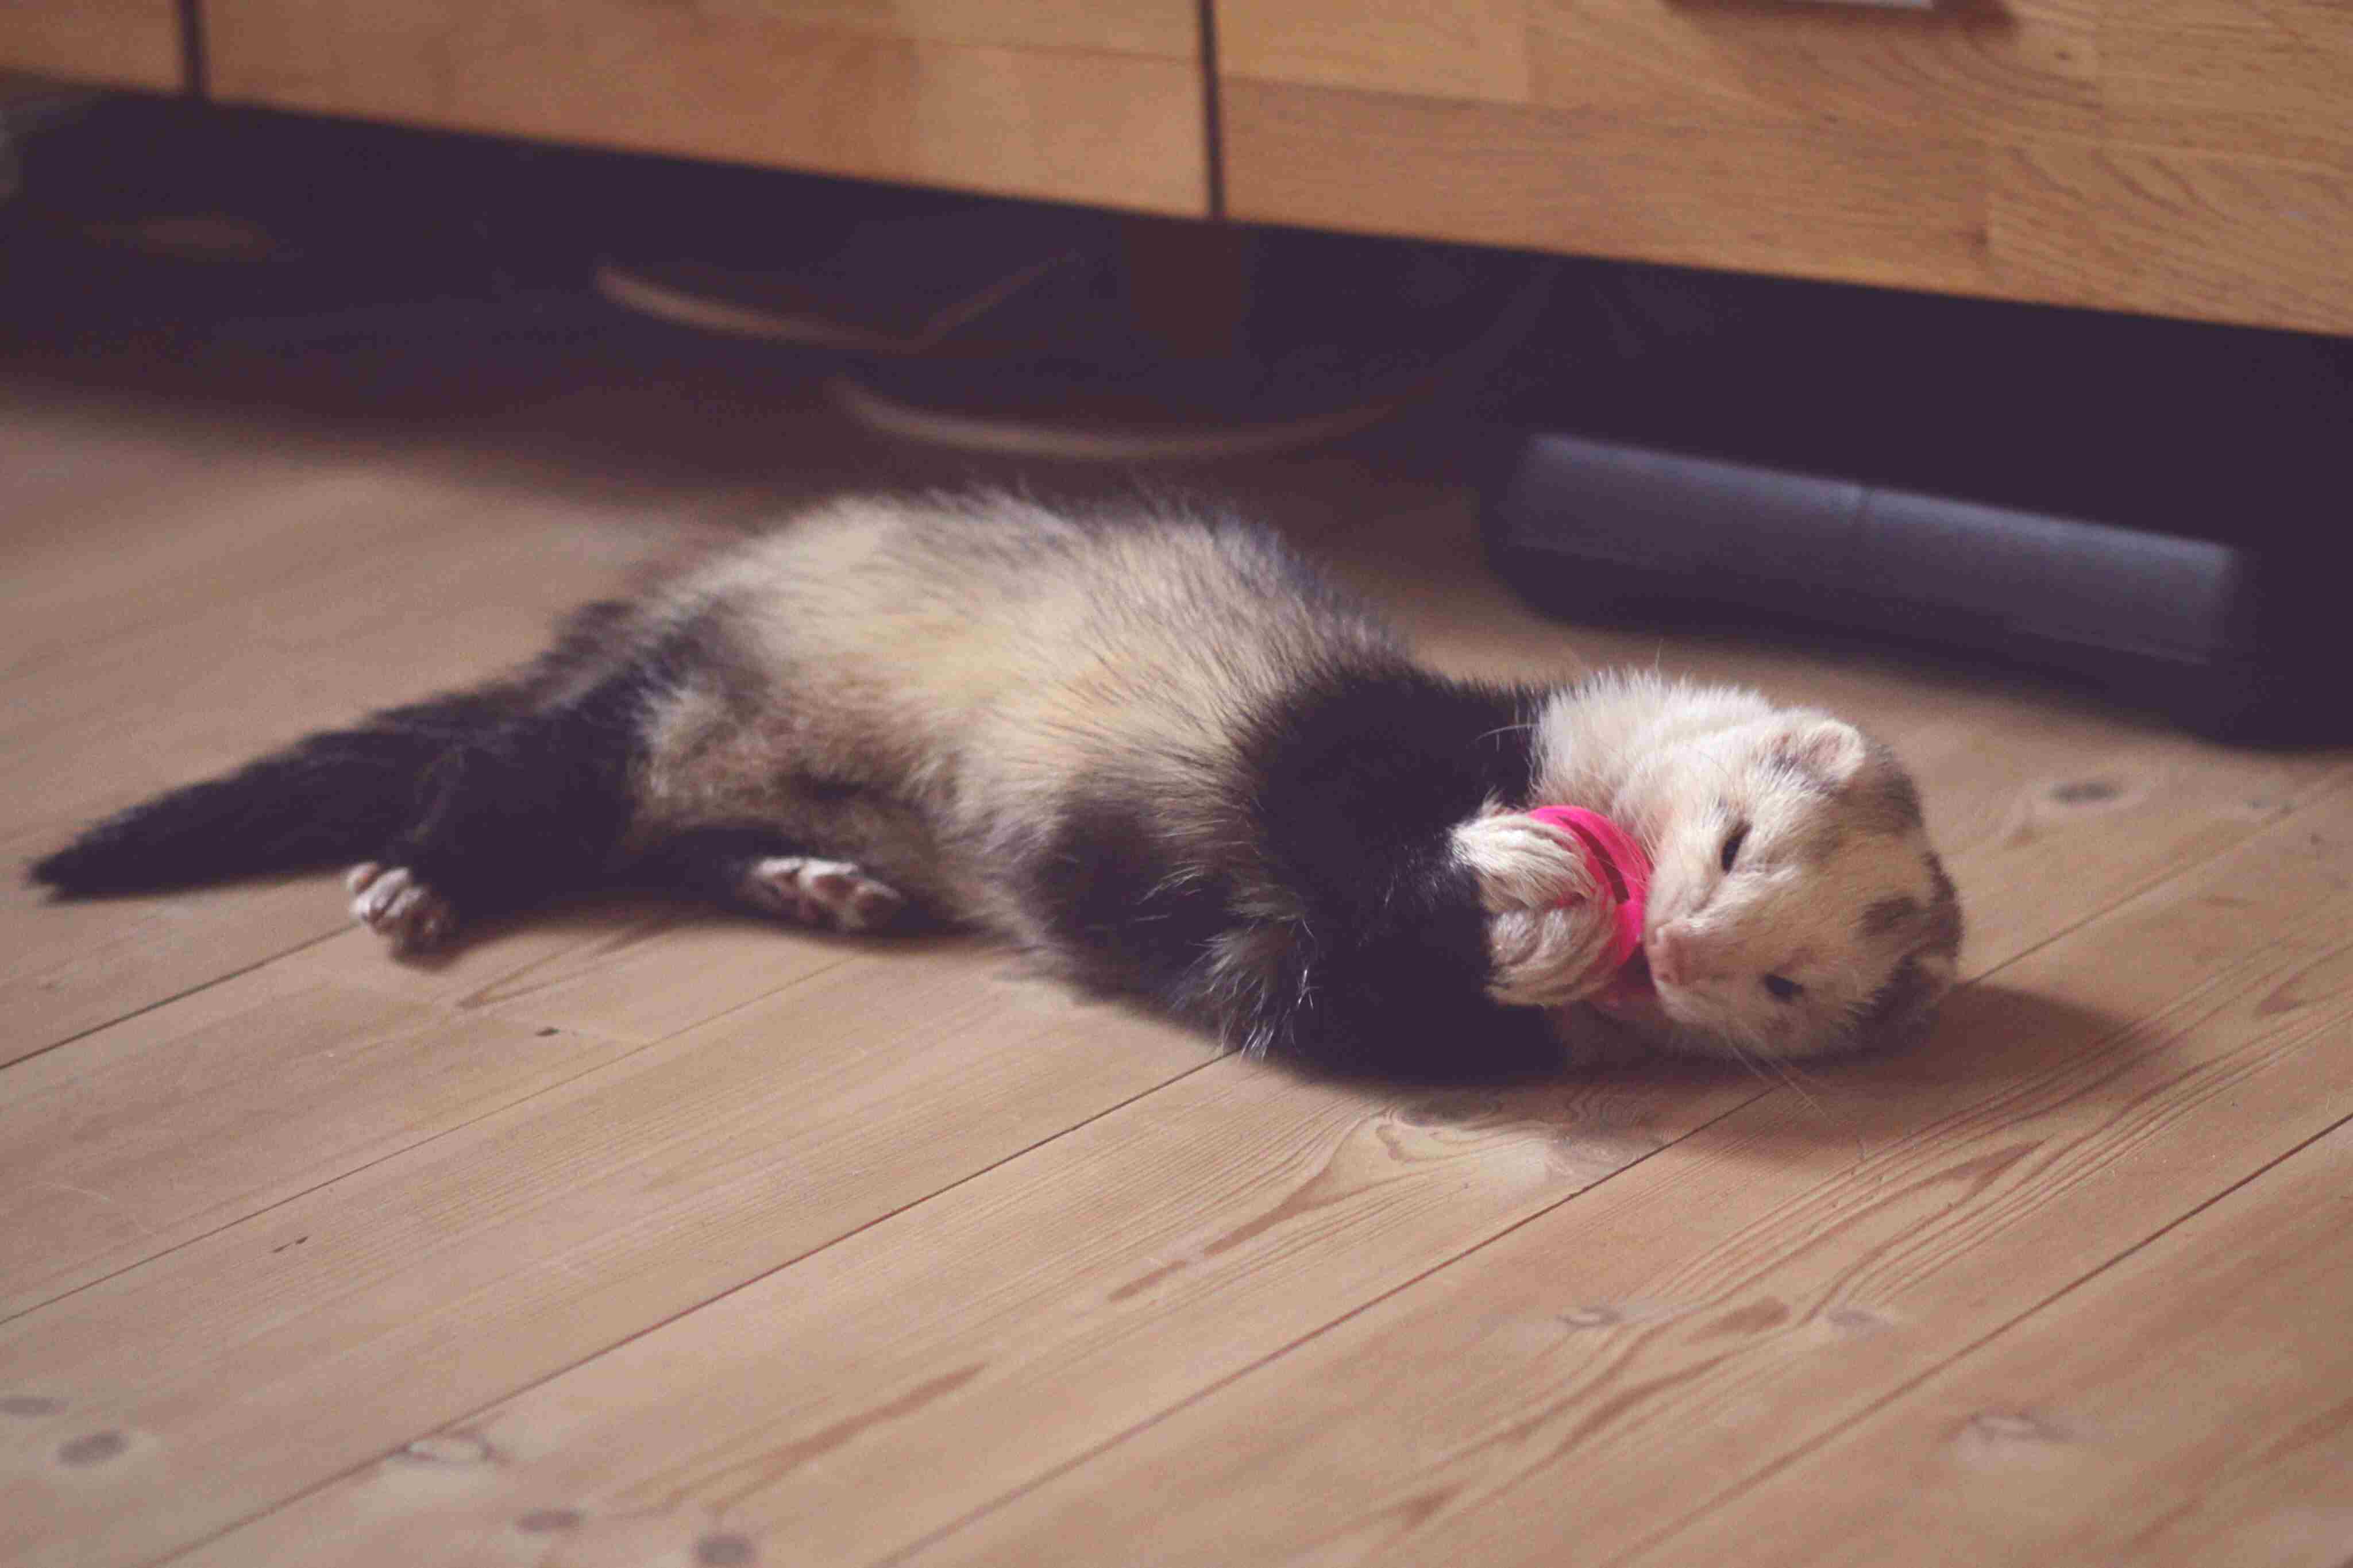 Ferret playing with a pink toy while lying on hardwood flooring.